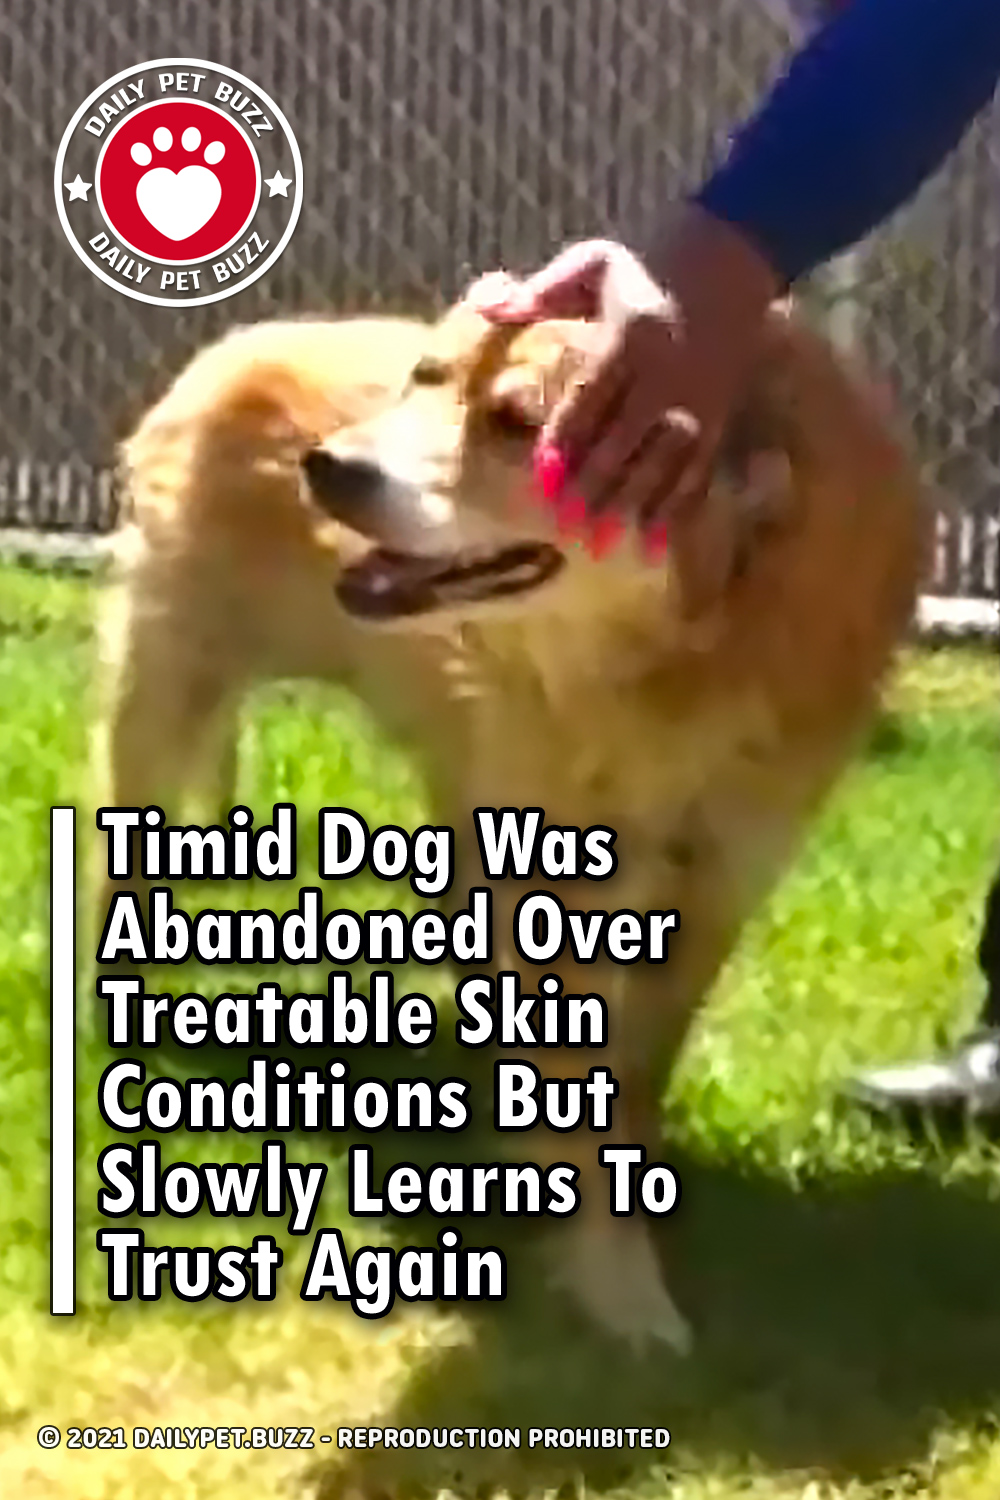 Timid Dog Was Abandoned Over Treatable Skin Conditions But Slowly Learns To Trust Again